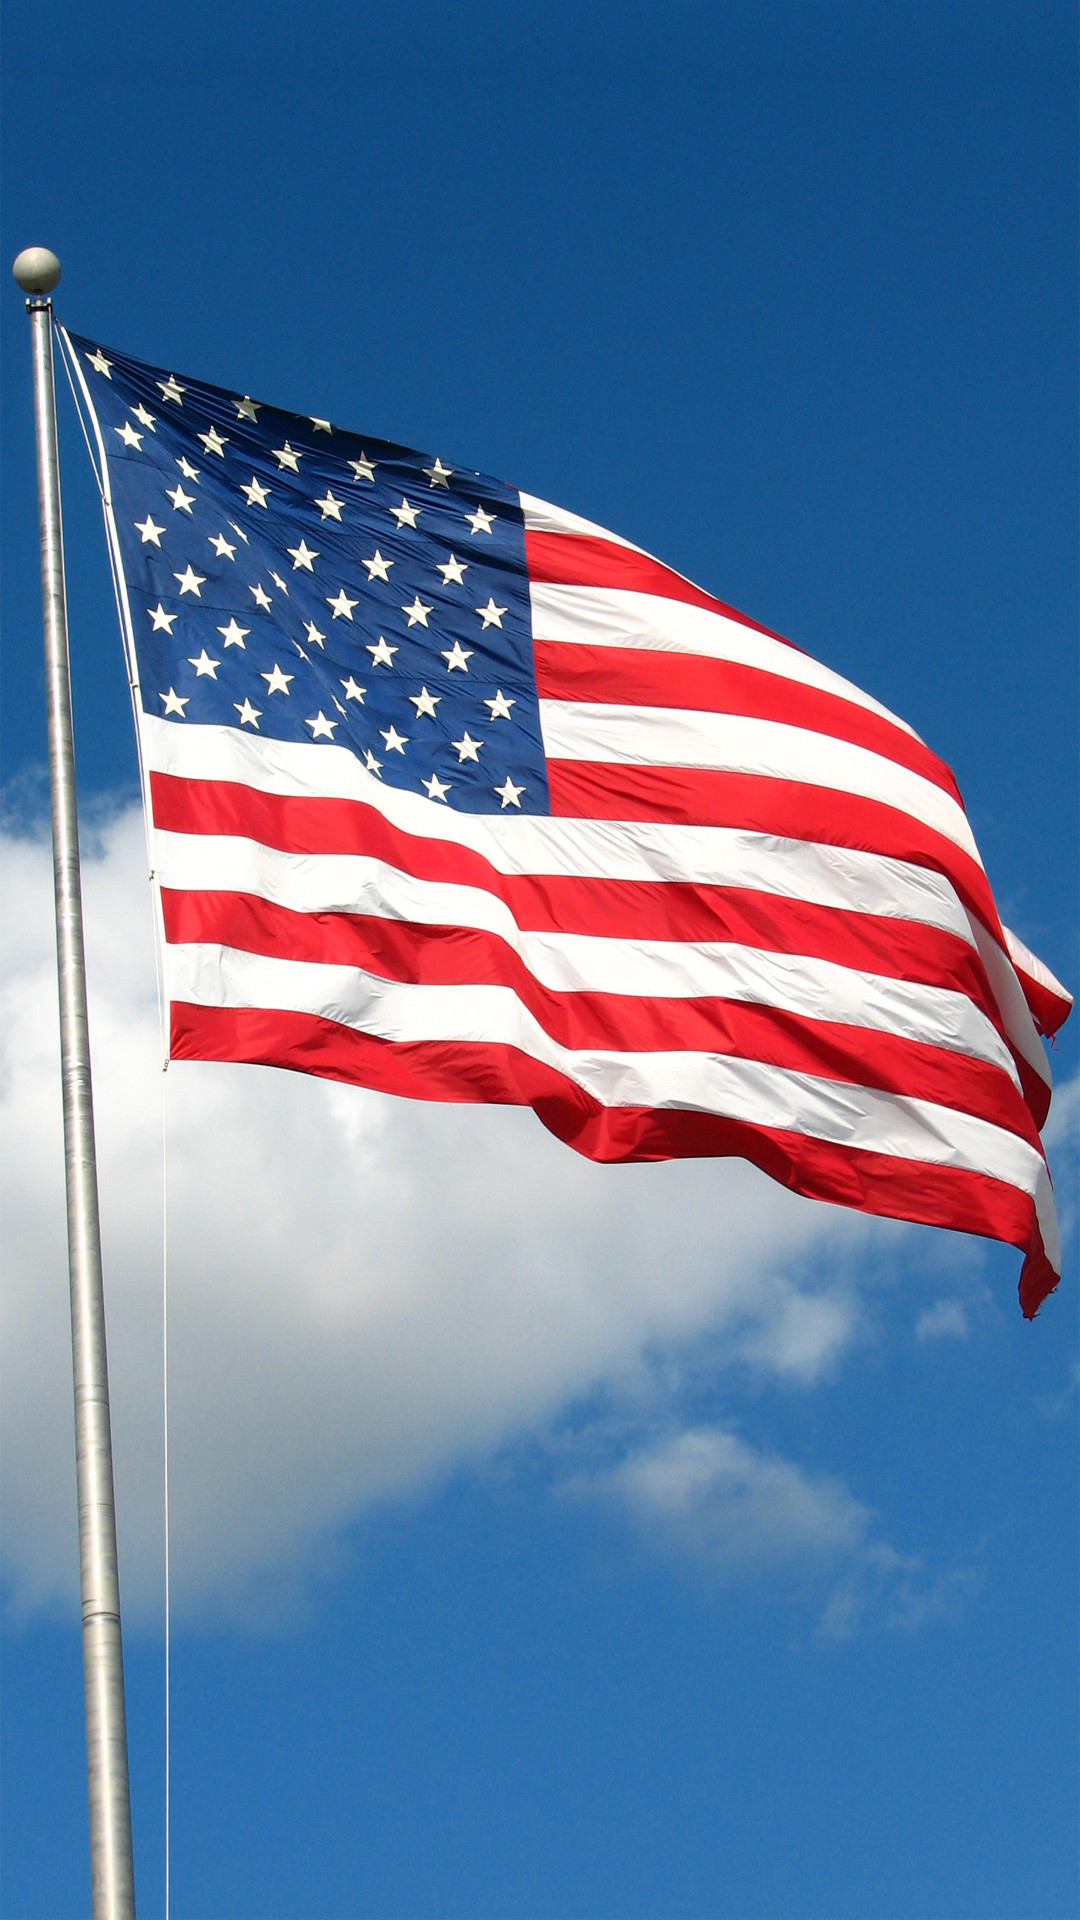 1080x1920 usa american flag sky android wallpaper free download with american  wallpaper.